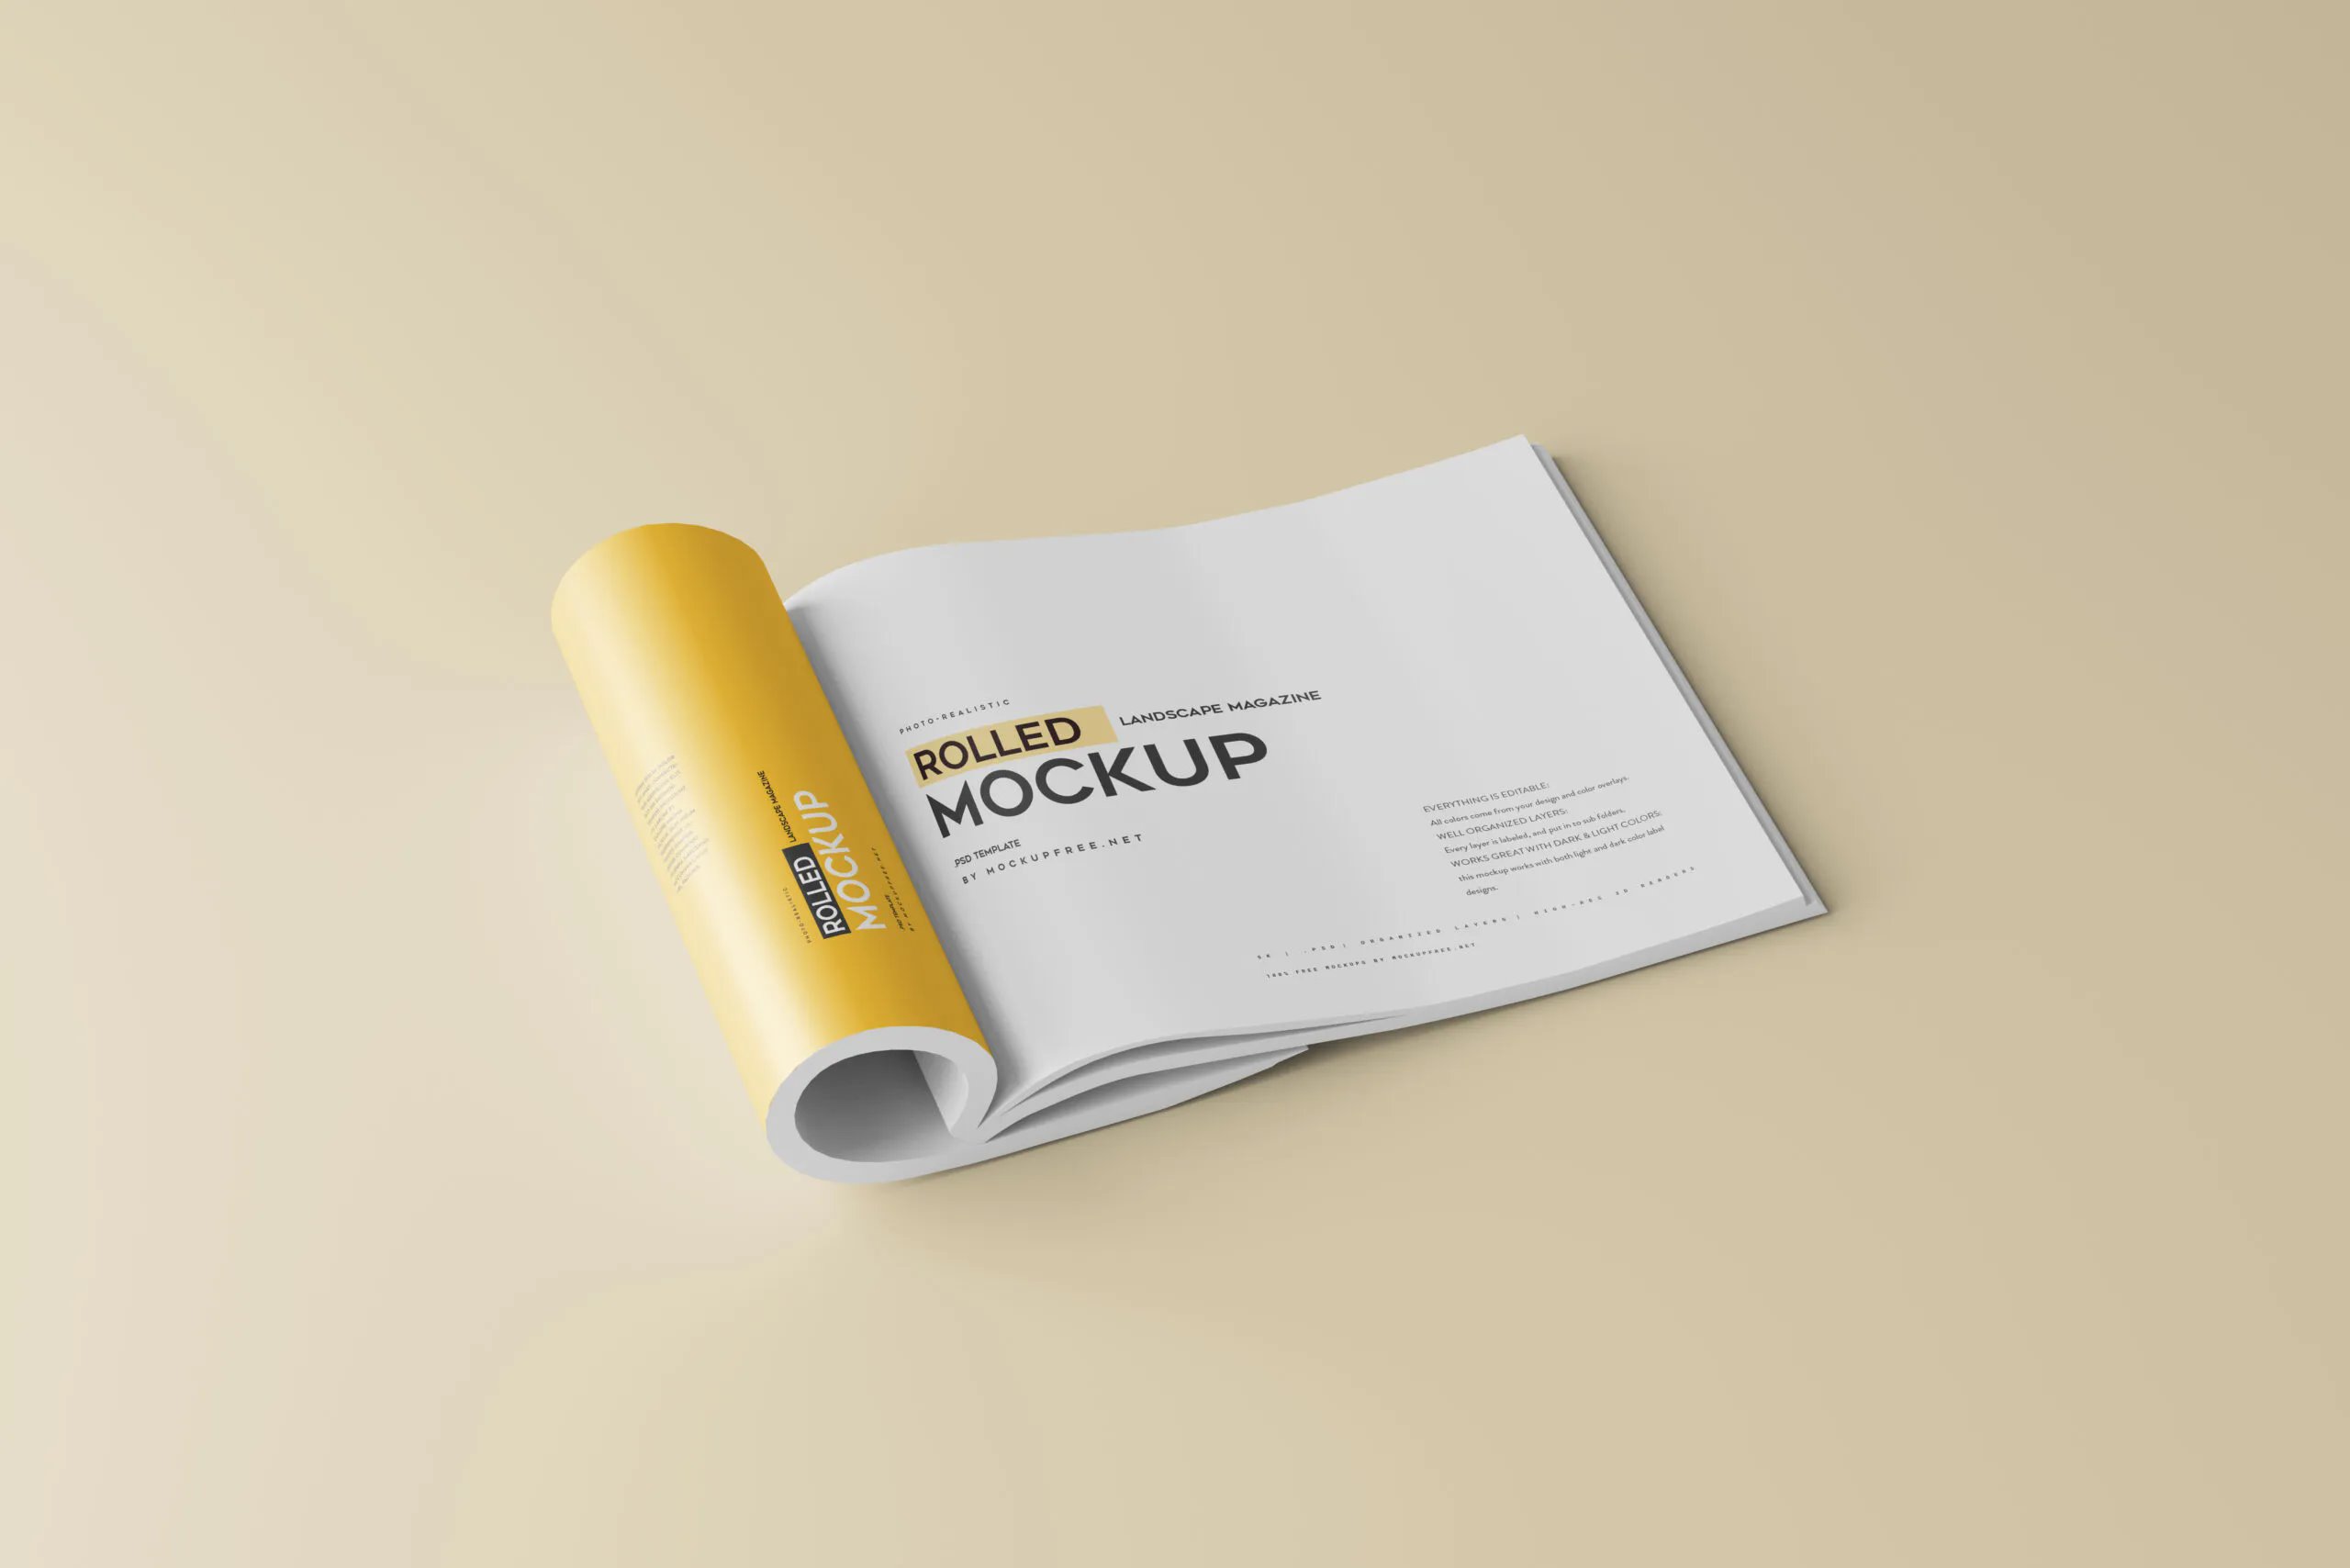 5 Landscape Rolled Up Magazine Mockup in Different Views FREE PSD